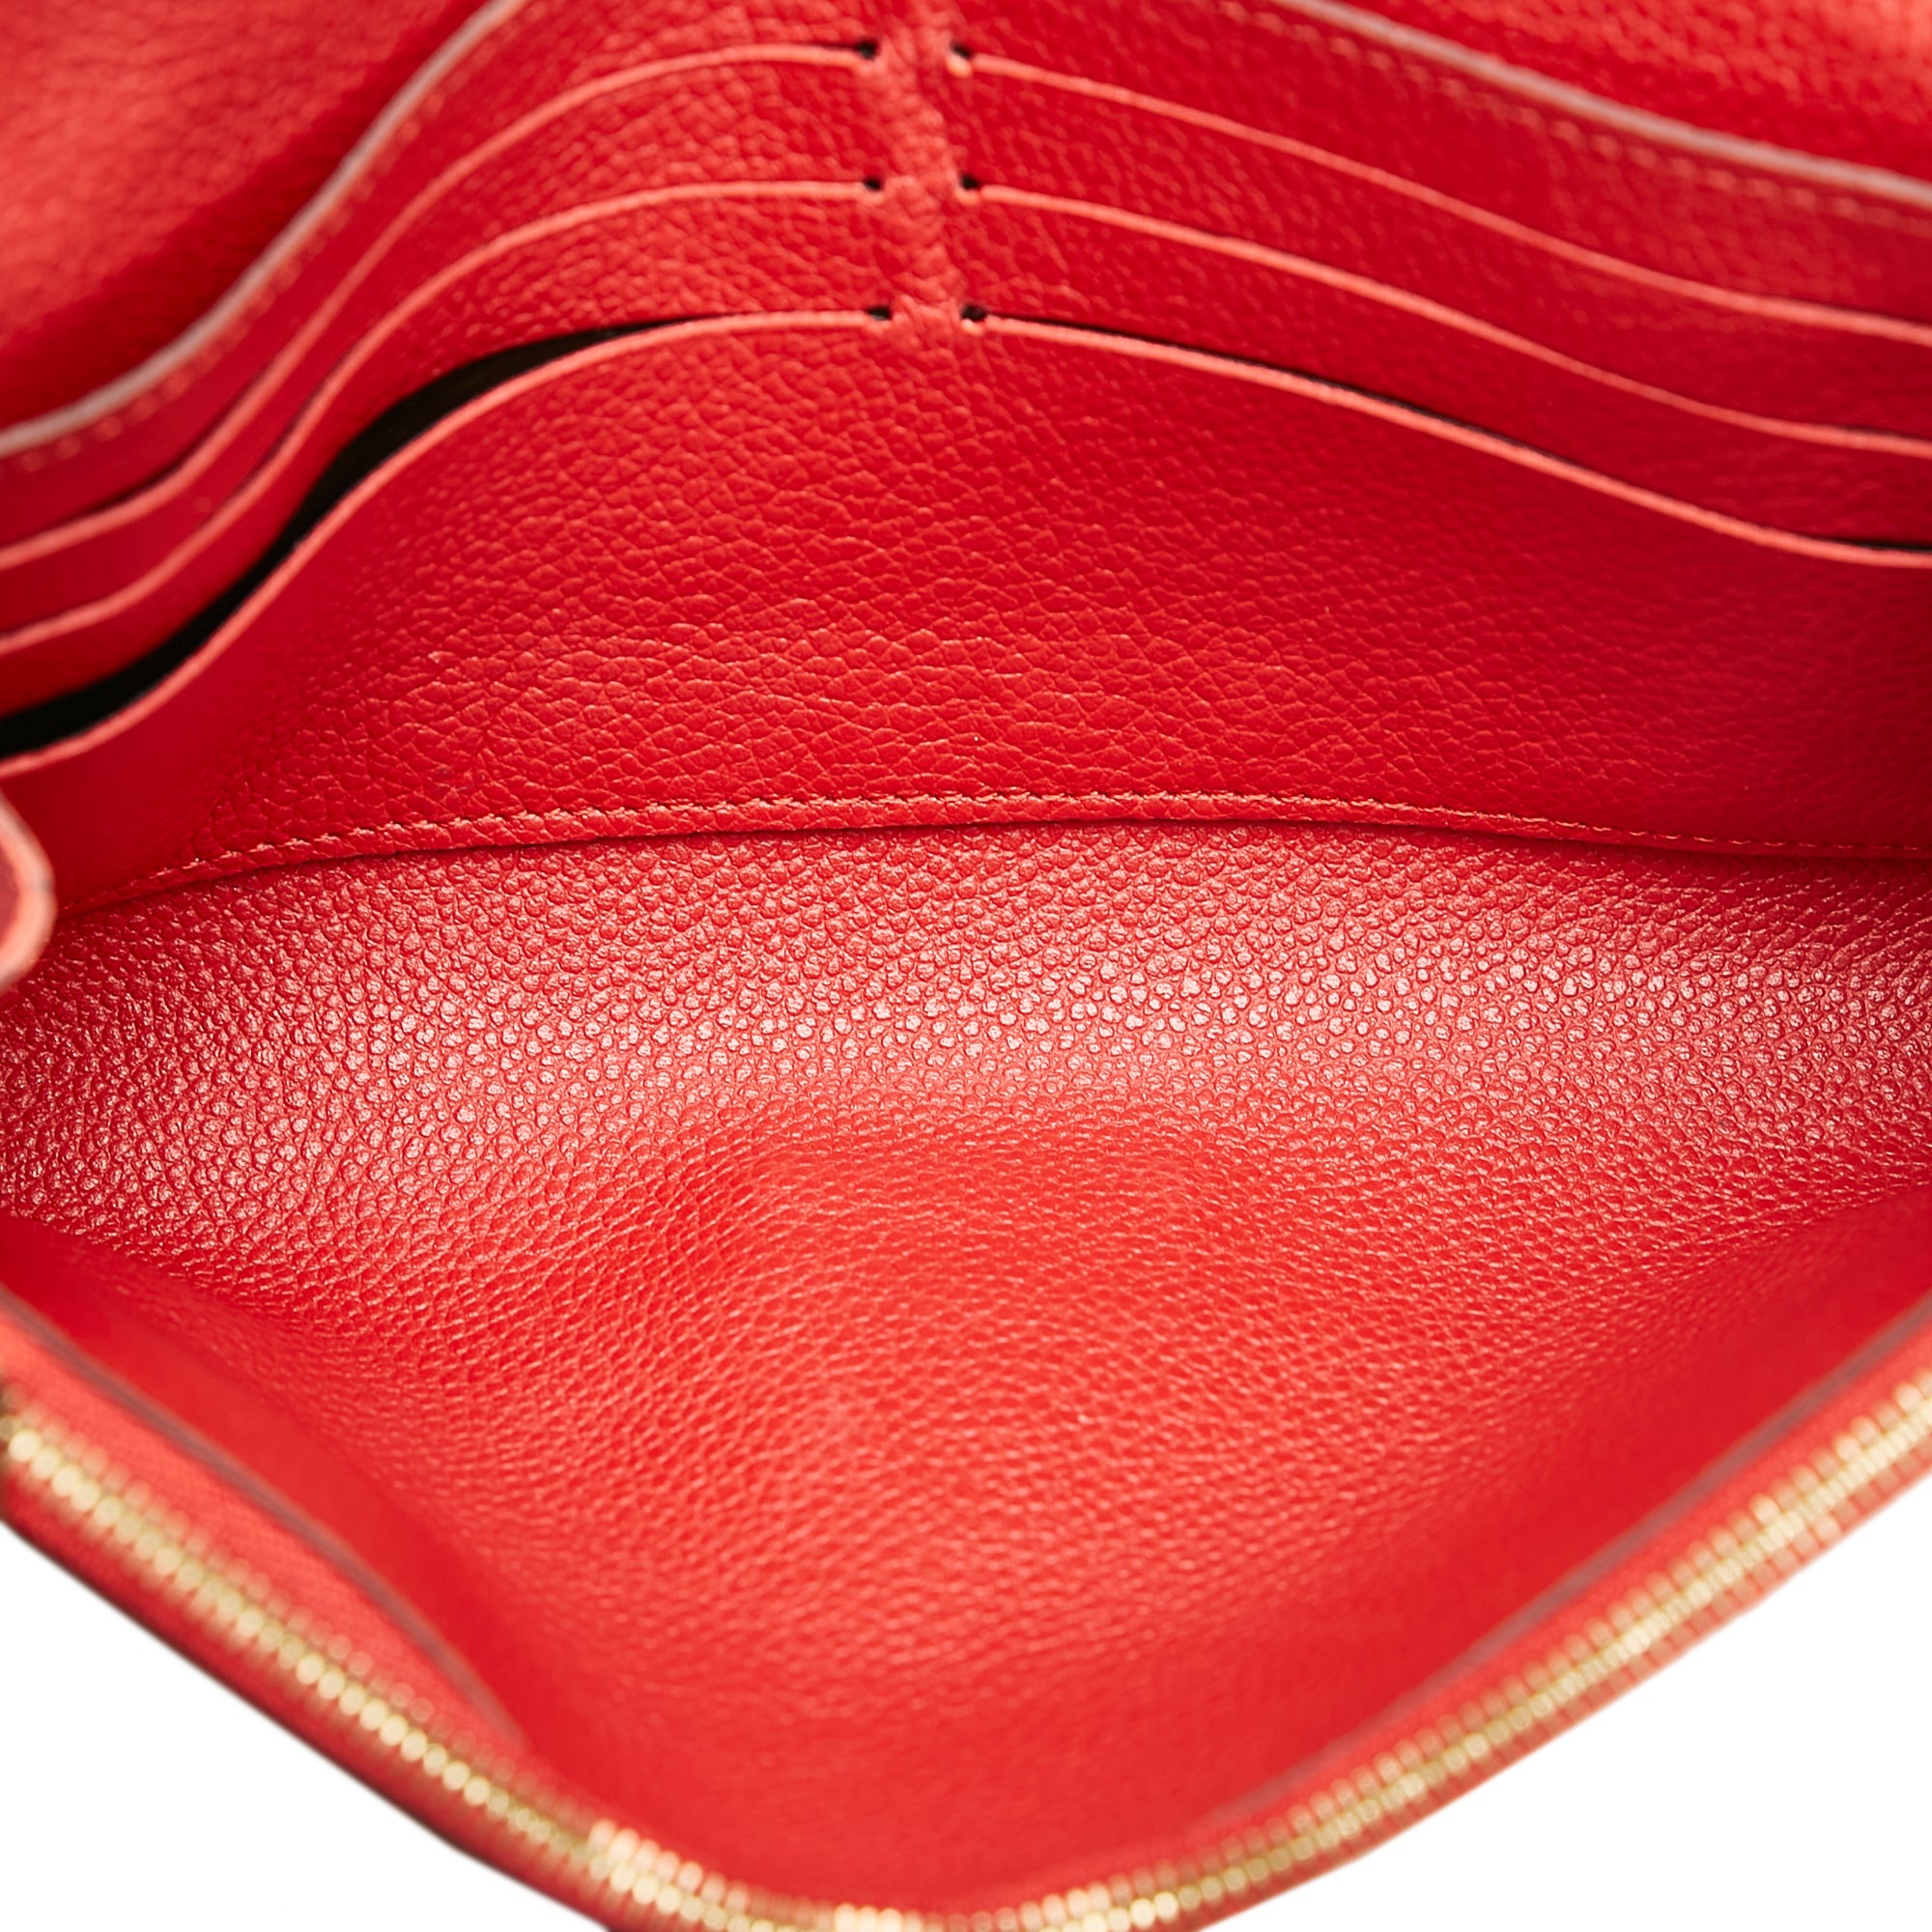 Louis Vuitton - Authenticated Saint-Germain Handbag - Leather Red for Women, Very Good Condition